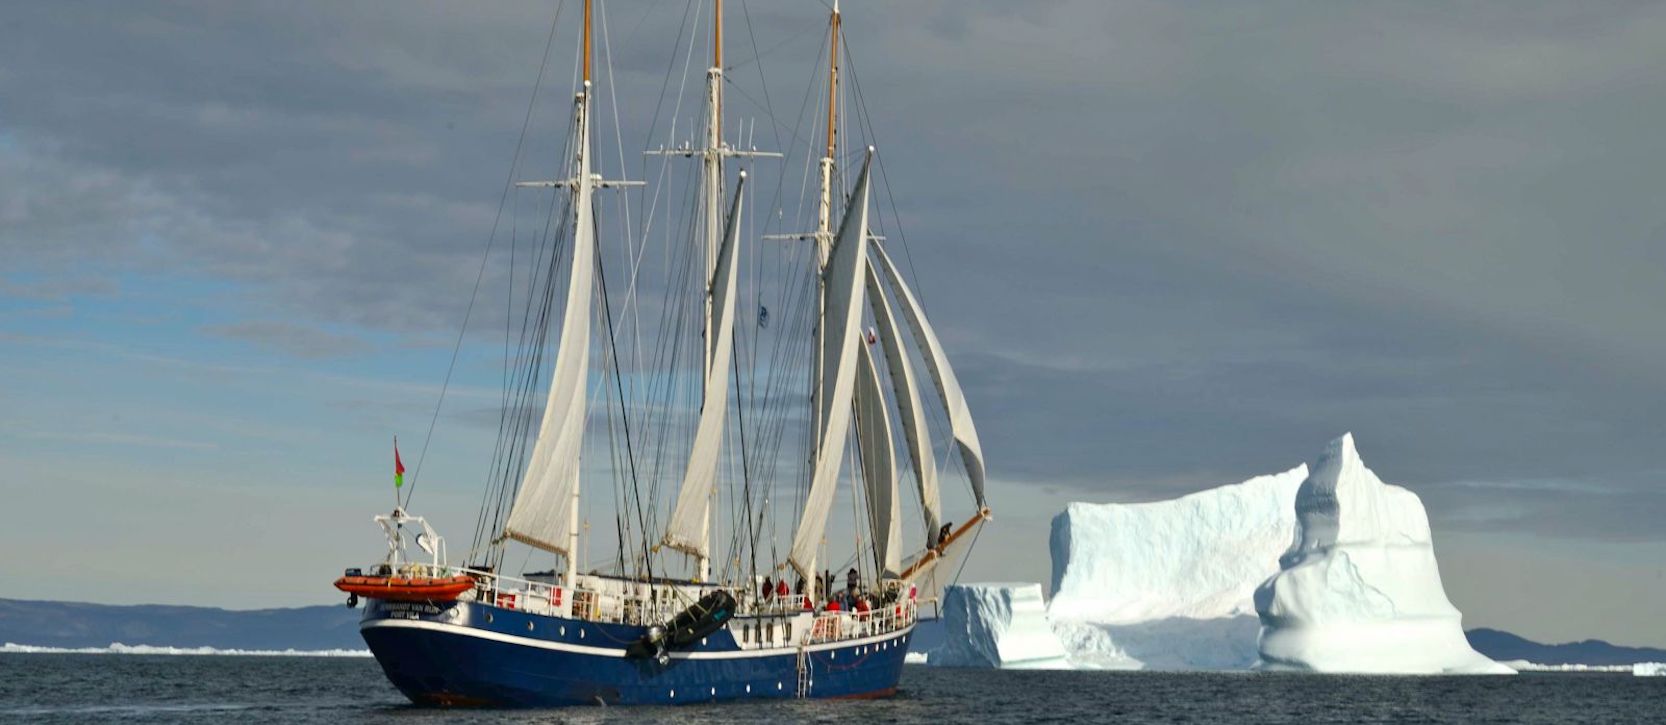 8 Day North Spitsbergen, Arctic Spring , embark on a voyage to an Arctic wildlife haven and the real top of the world.